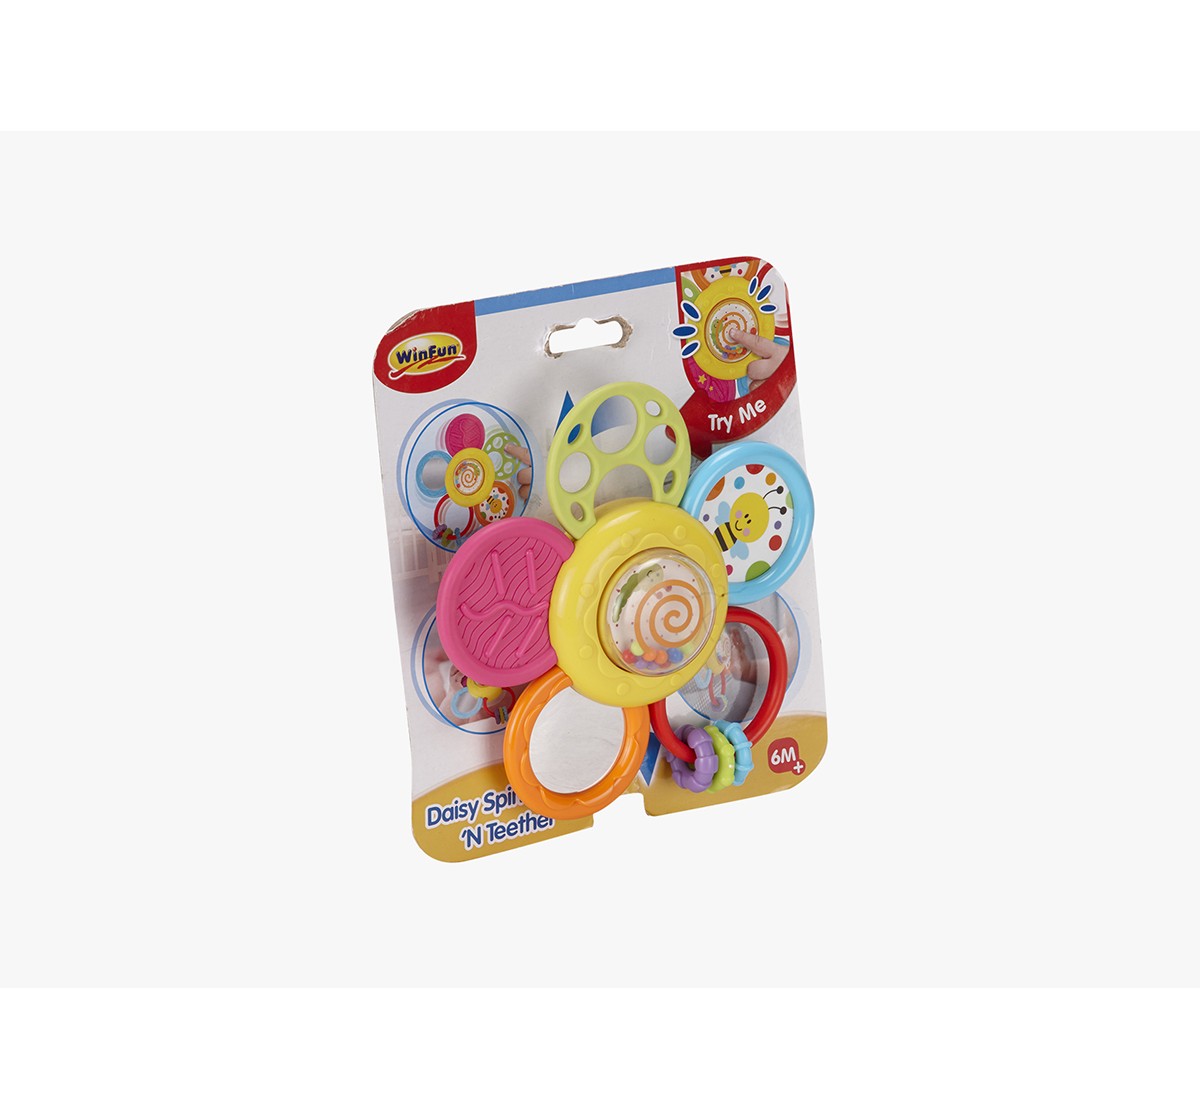  Winfun Press N Spin Flower Activity Toys for Kids age 3M+ 